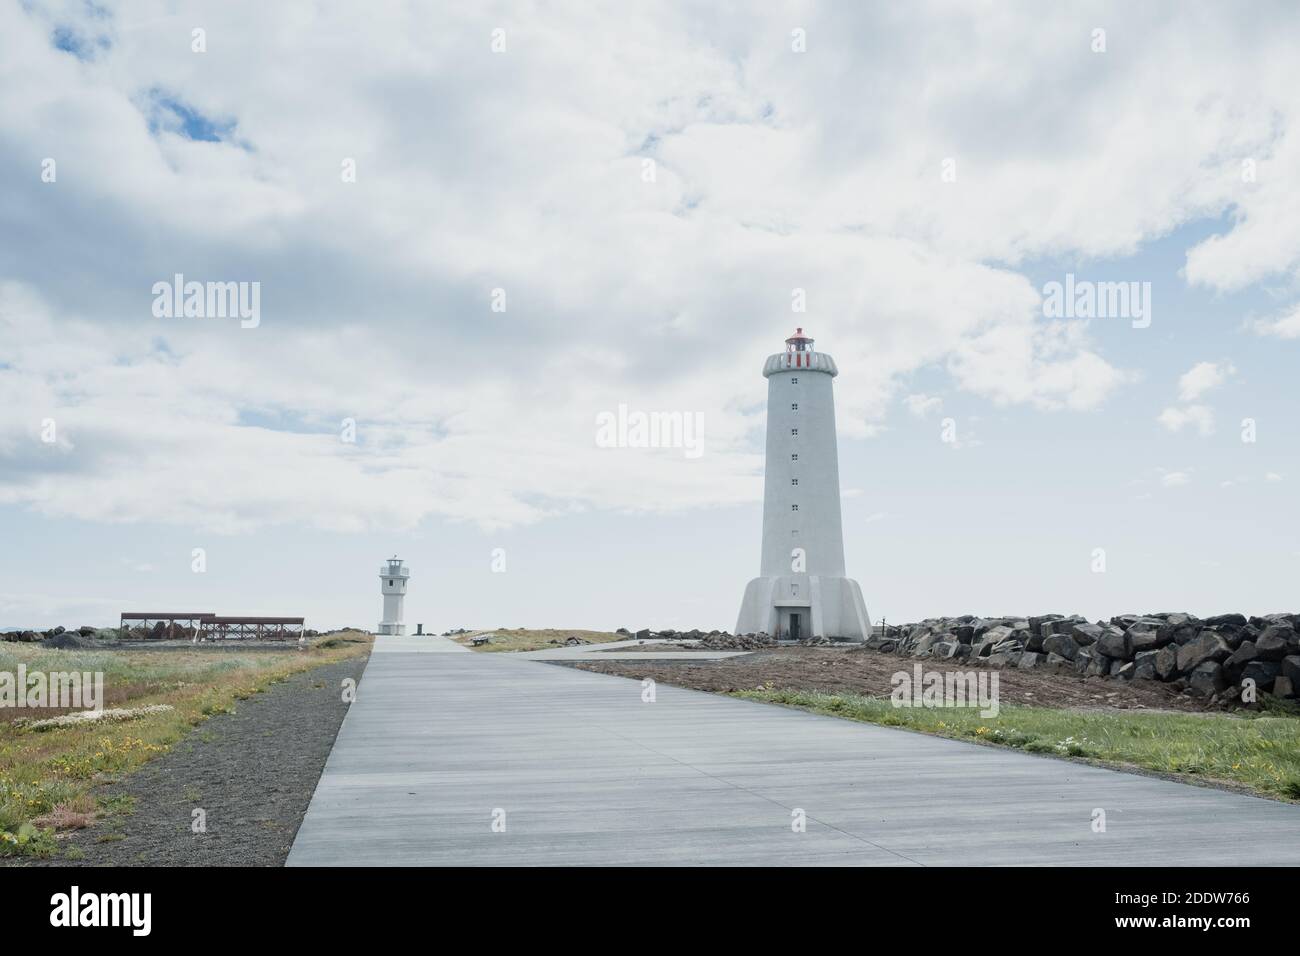 The new lighthouse in Akranes and the old lighthouse in the background. Iceland. Stock Photo